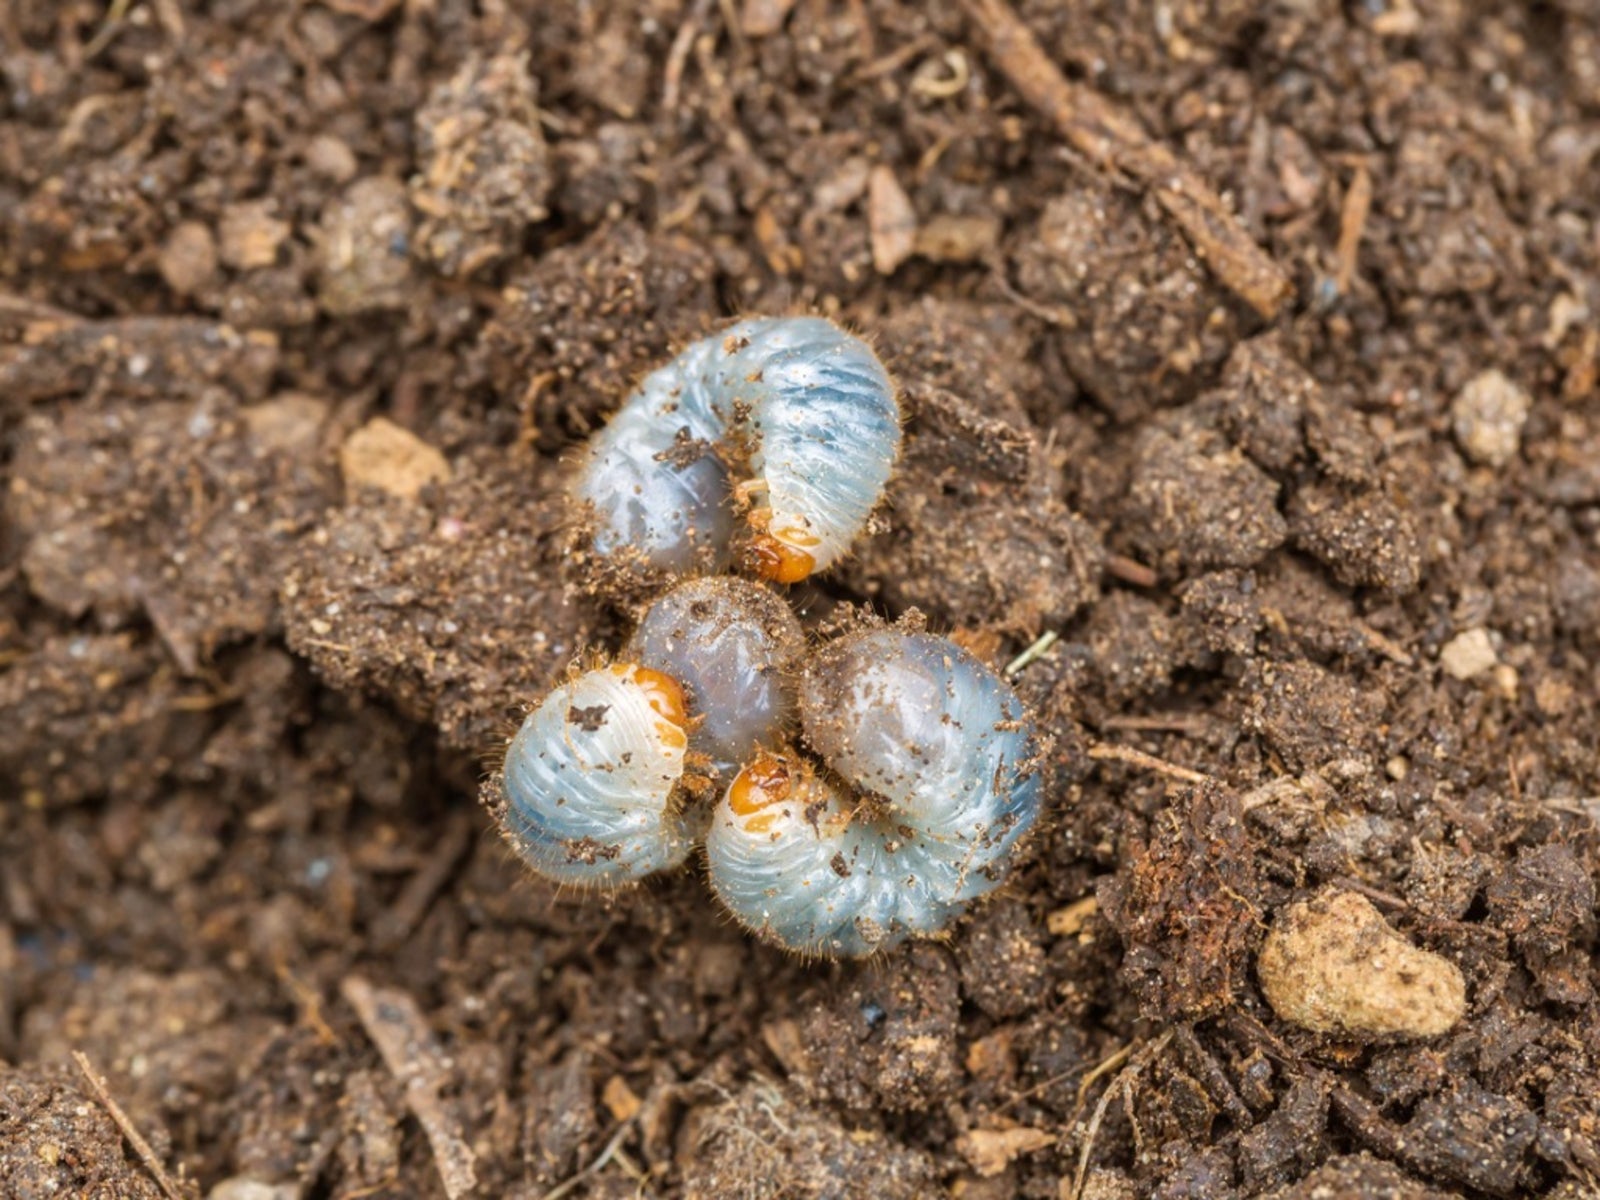 Grub Worm Control: Tips On How To Get Rid Of Lawn Grubs